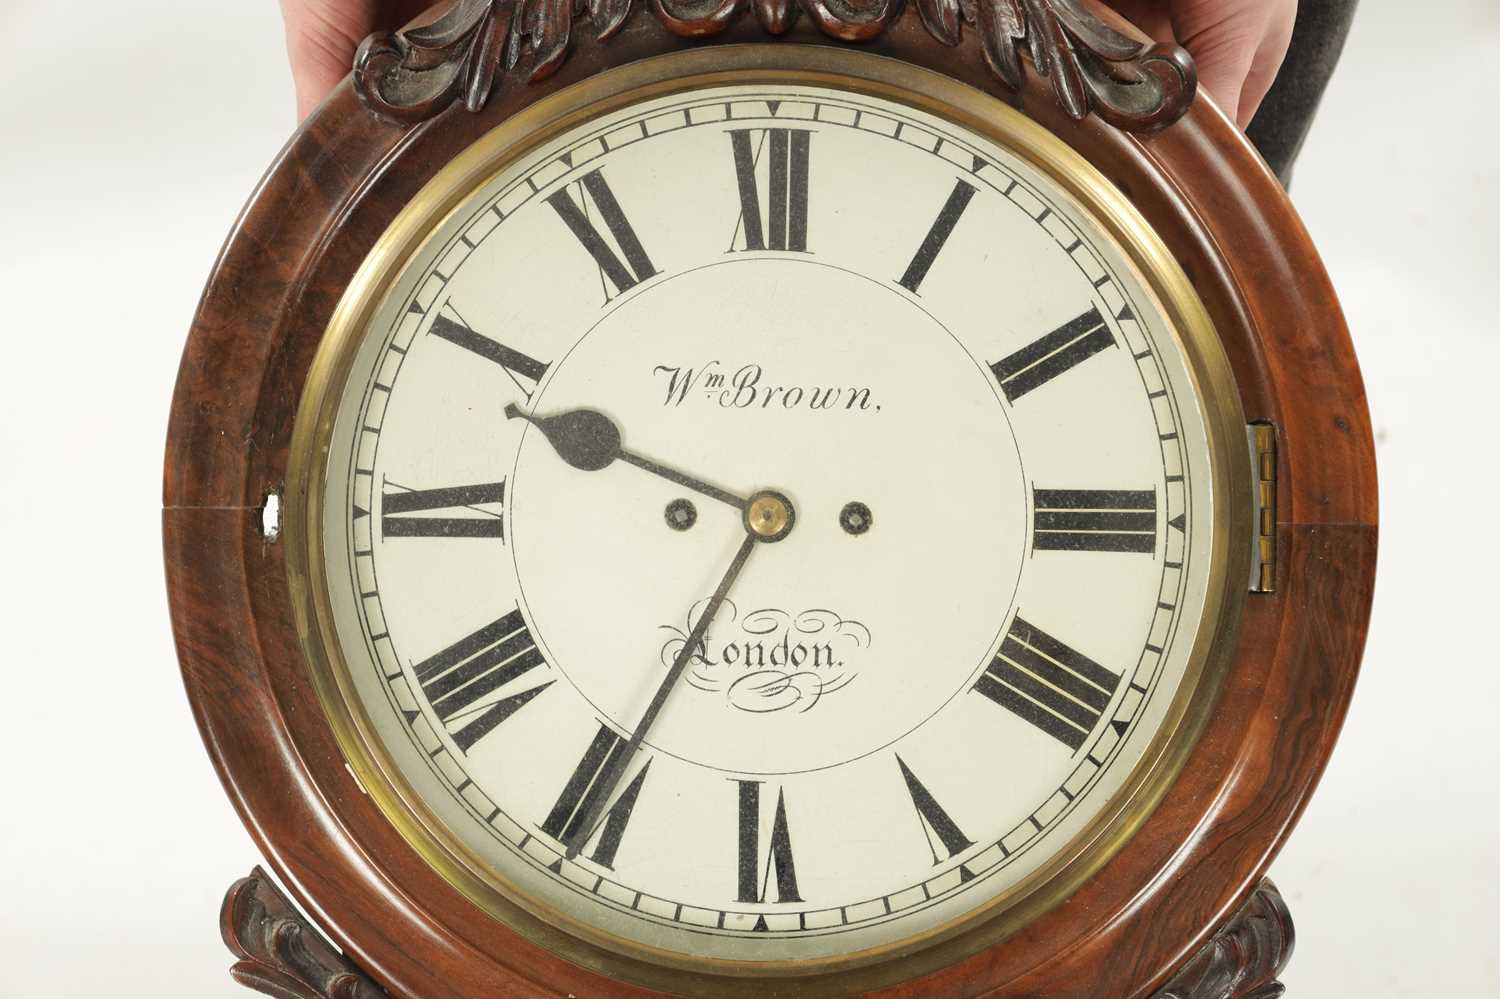 W. BROWN. LONDON. A LATE 19TH CENTURY CARVED WALNUT DOUBLE FUSEE WALL CLOCK - Image 3 of 8